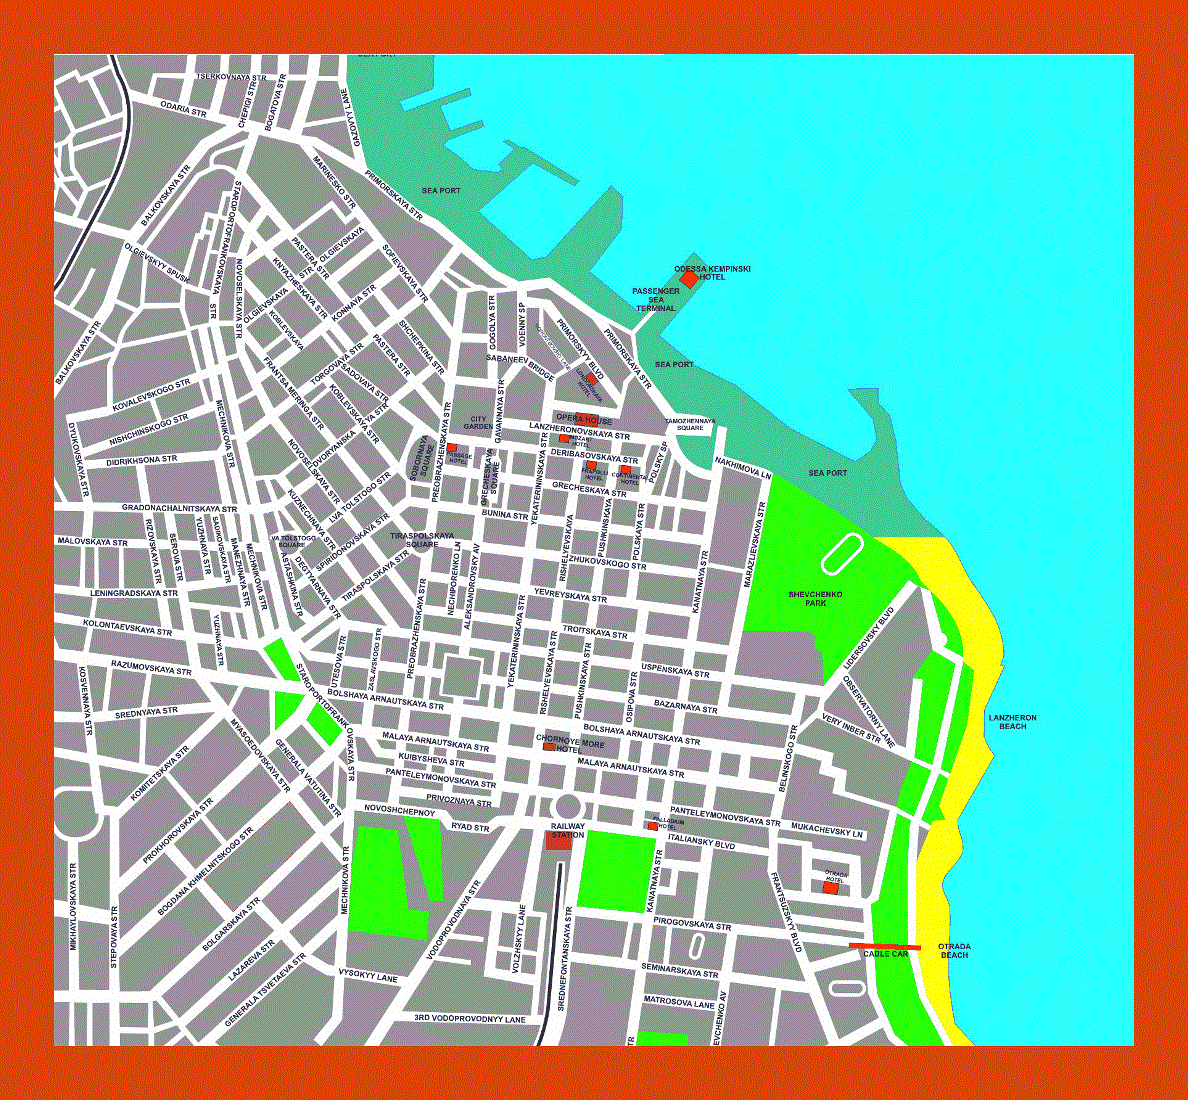 Hotels map of Odessa city center in english